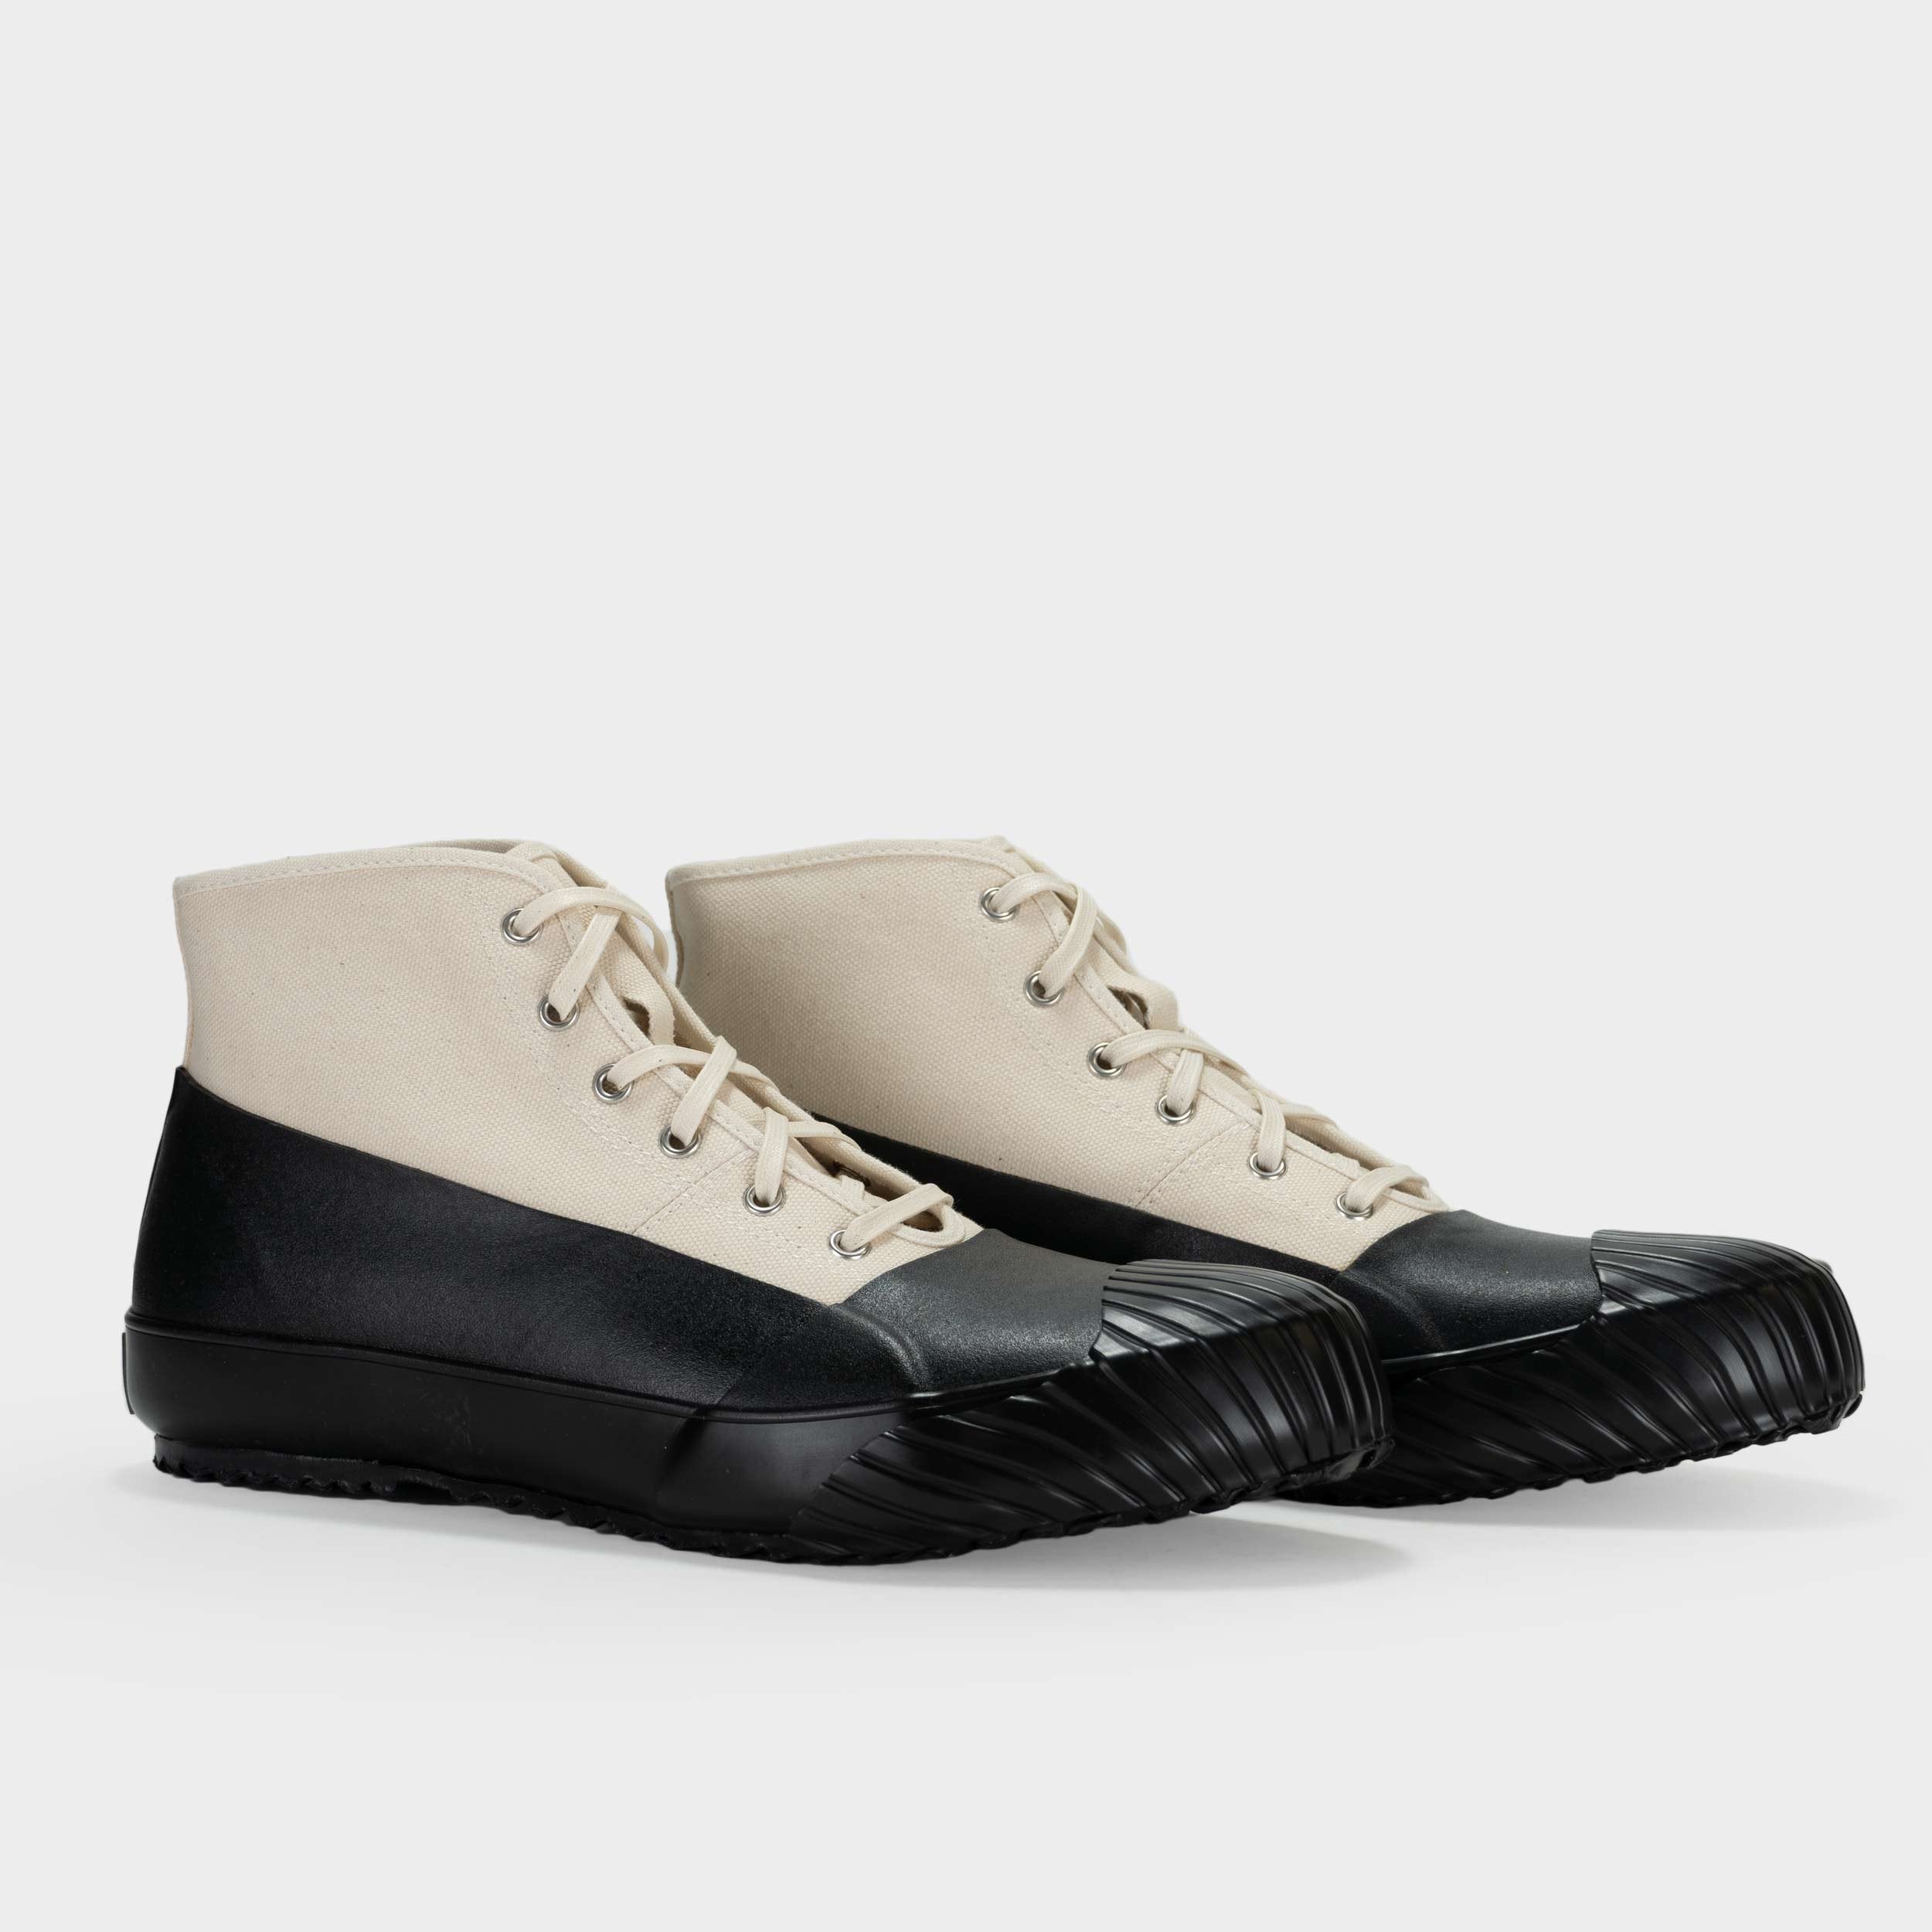 (Waitlist) Japanese All Weather High Top in Putty/ Black